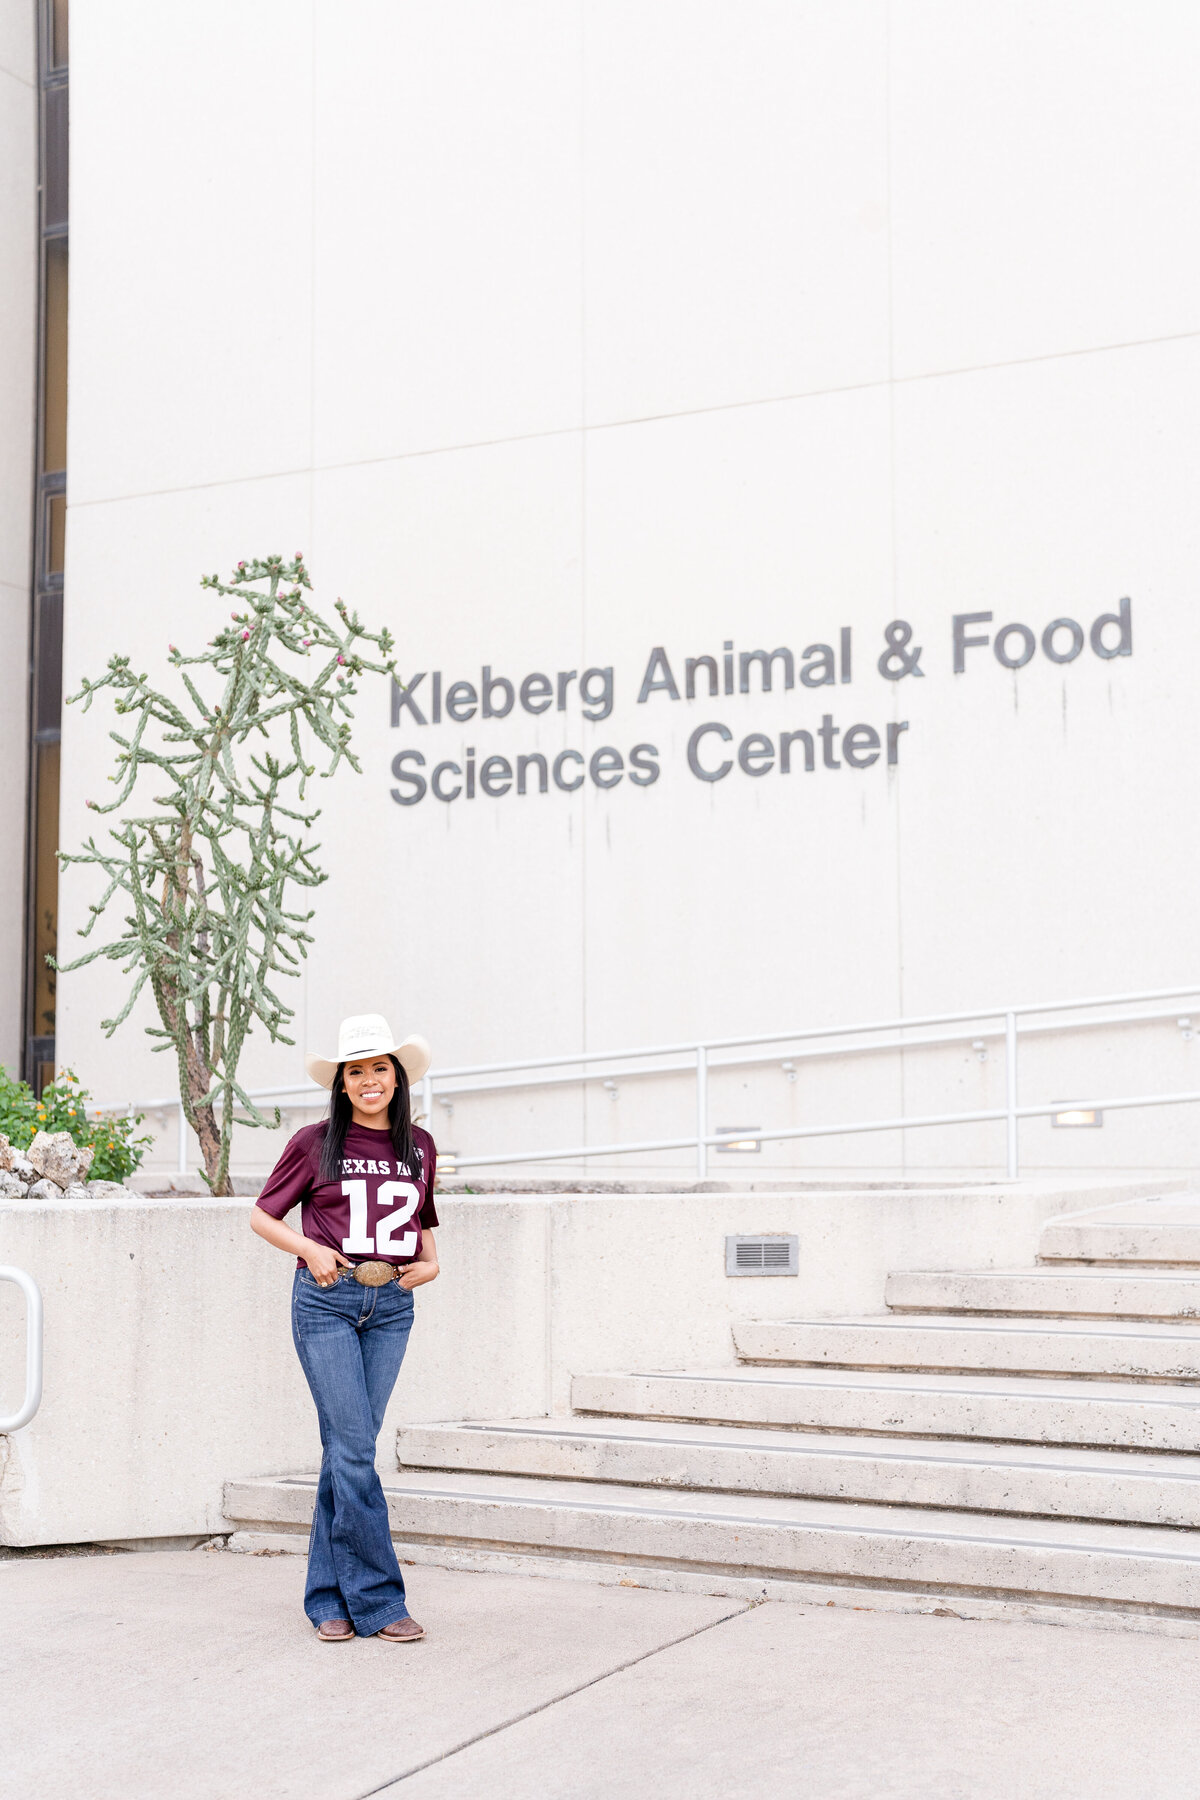 Texas A&M senior girl standing with hands in pockets in front of Kleberg while wearing jeans, cowboy hat and maroon Aggie jersey